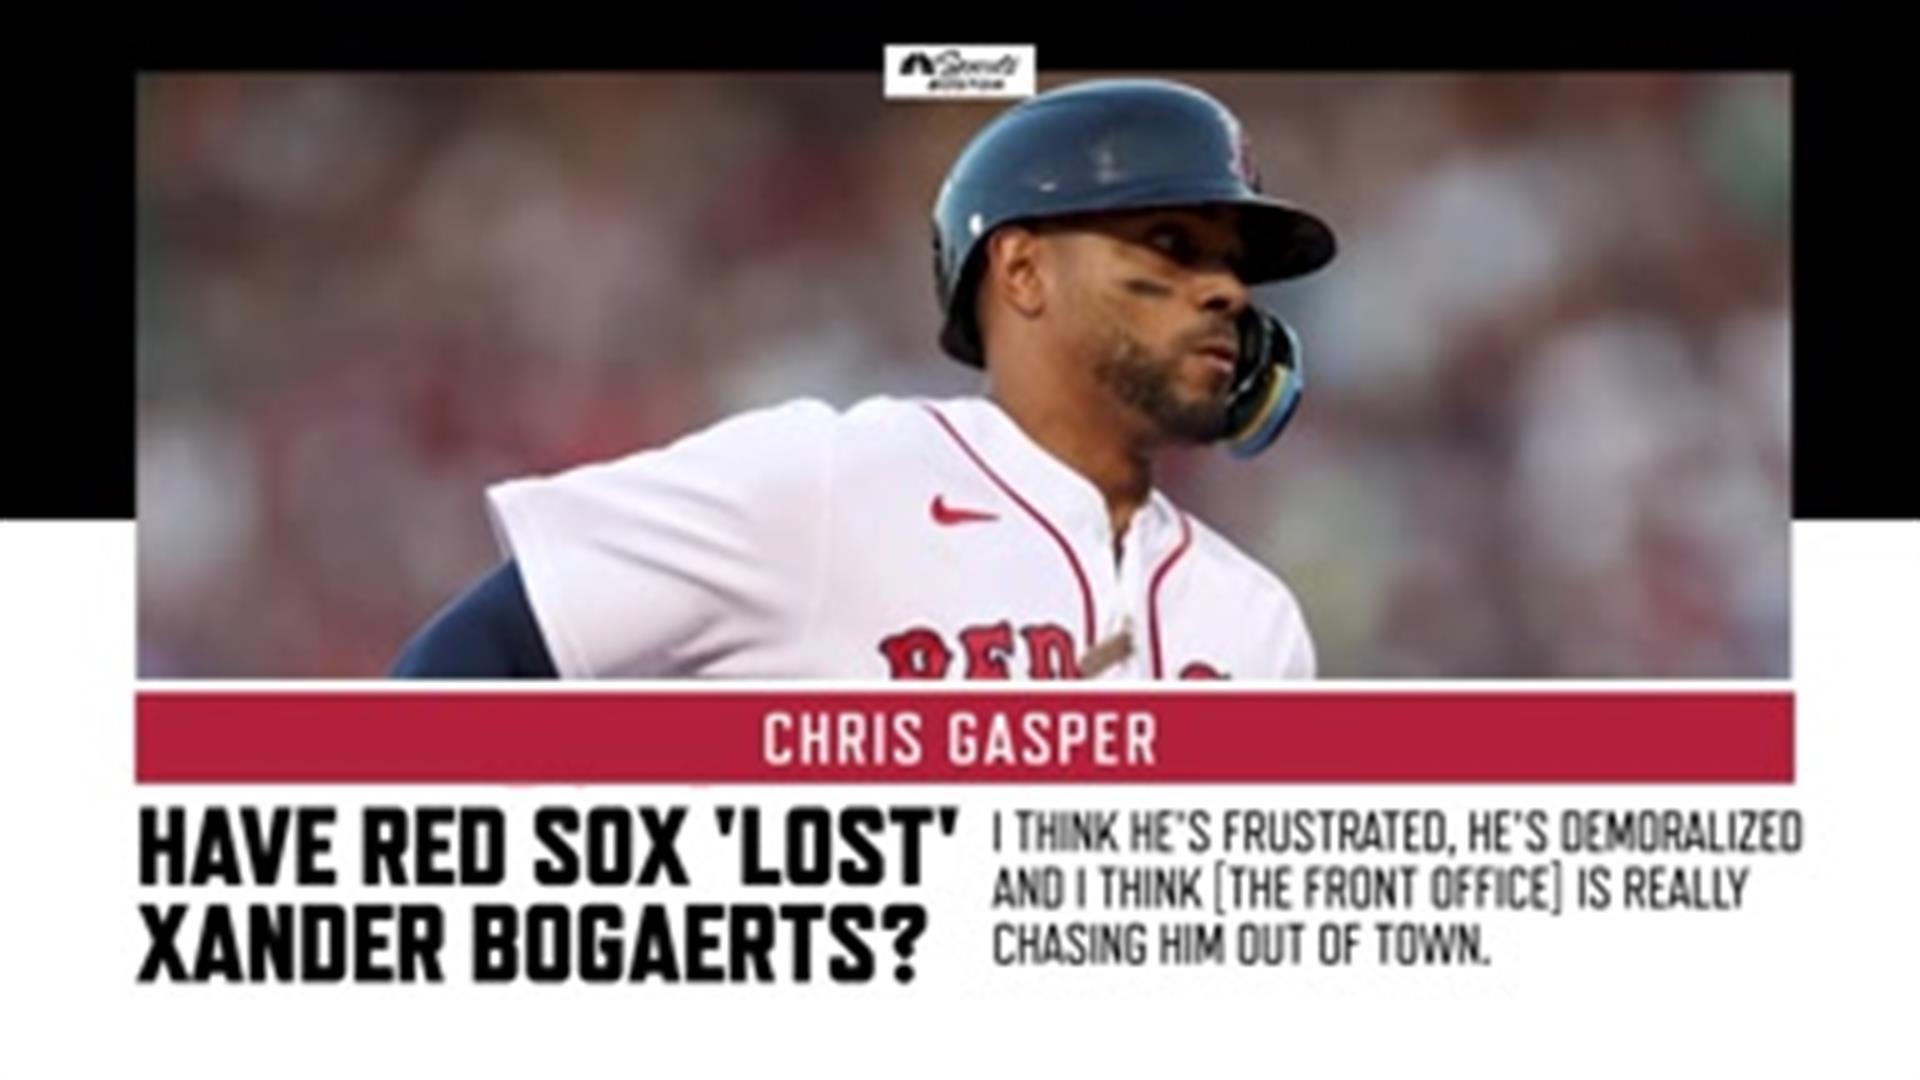 Gasper: I think Red Sox front office is chasing Xander Bogaerts out of town  – NBC Sports Boston